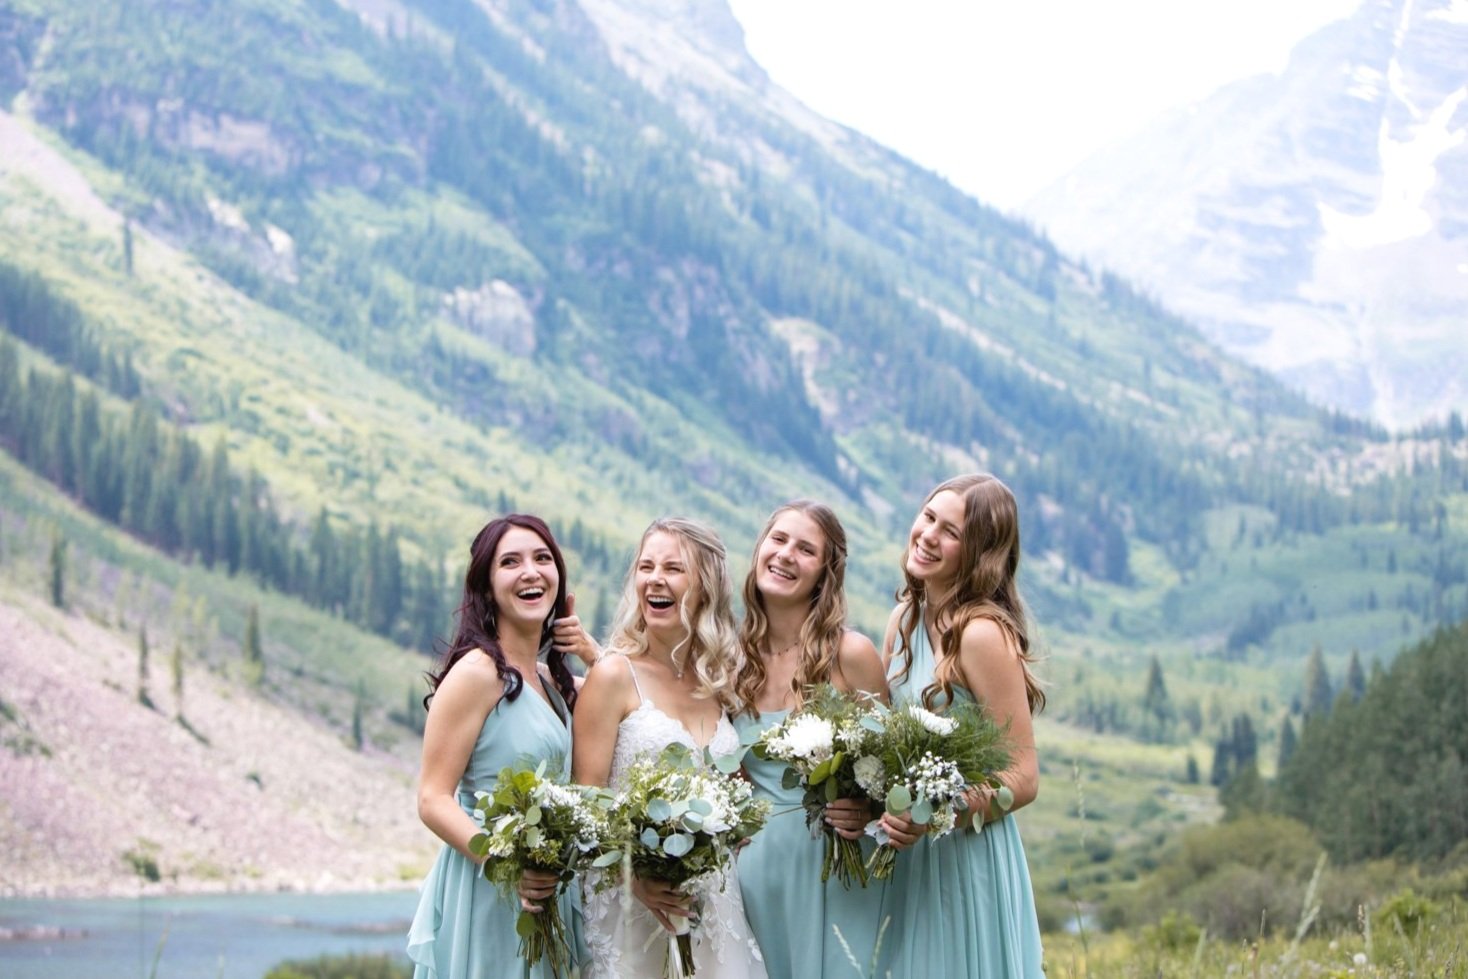 Candid Bridal Photography  in Colorado by CliftonMarie Photography